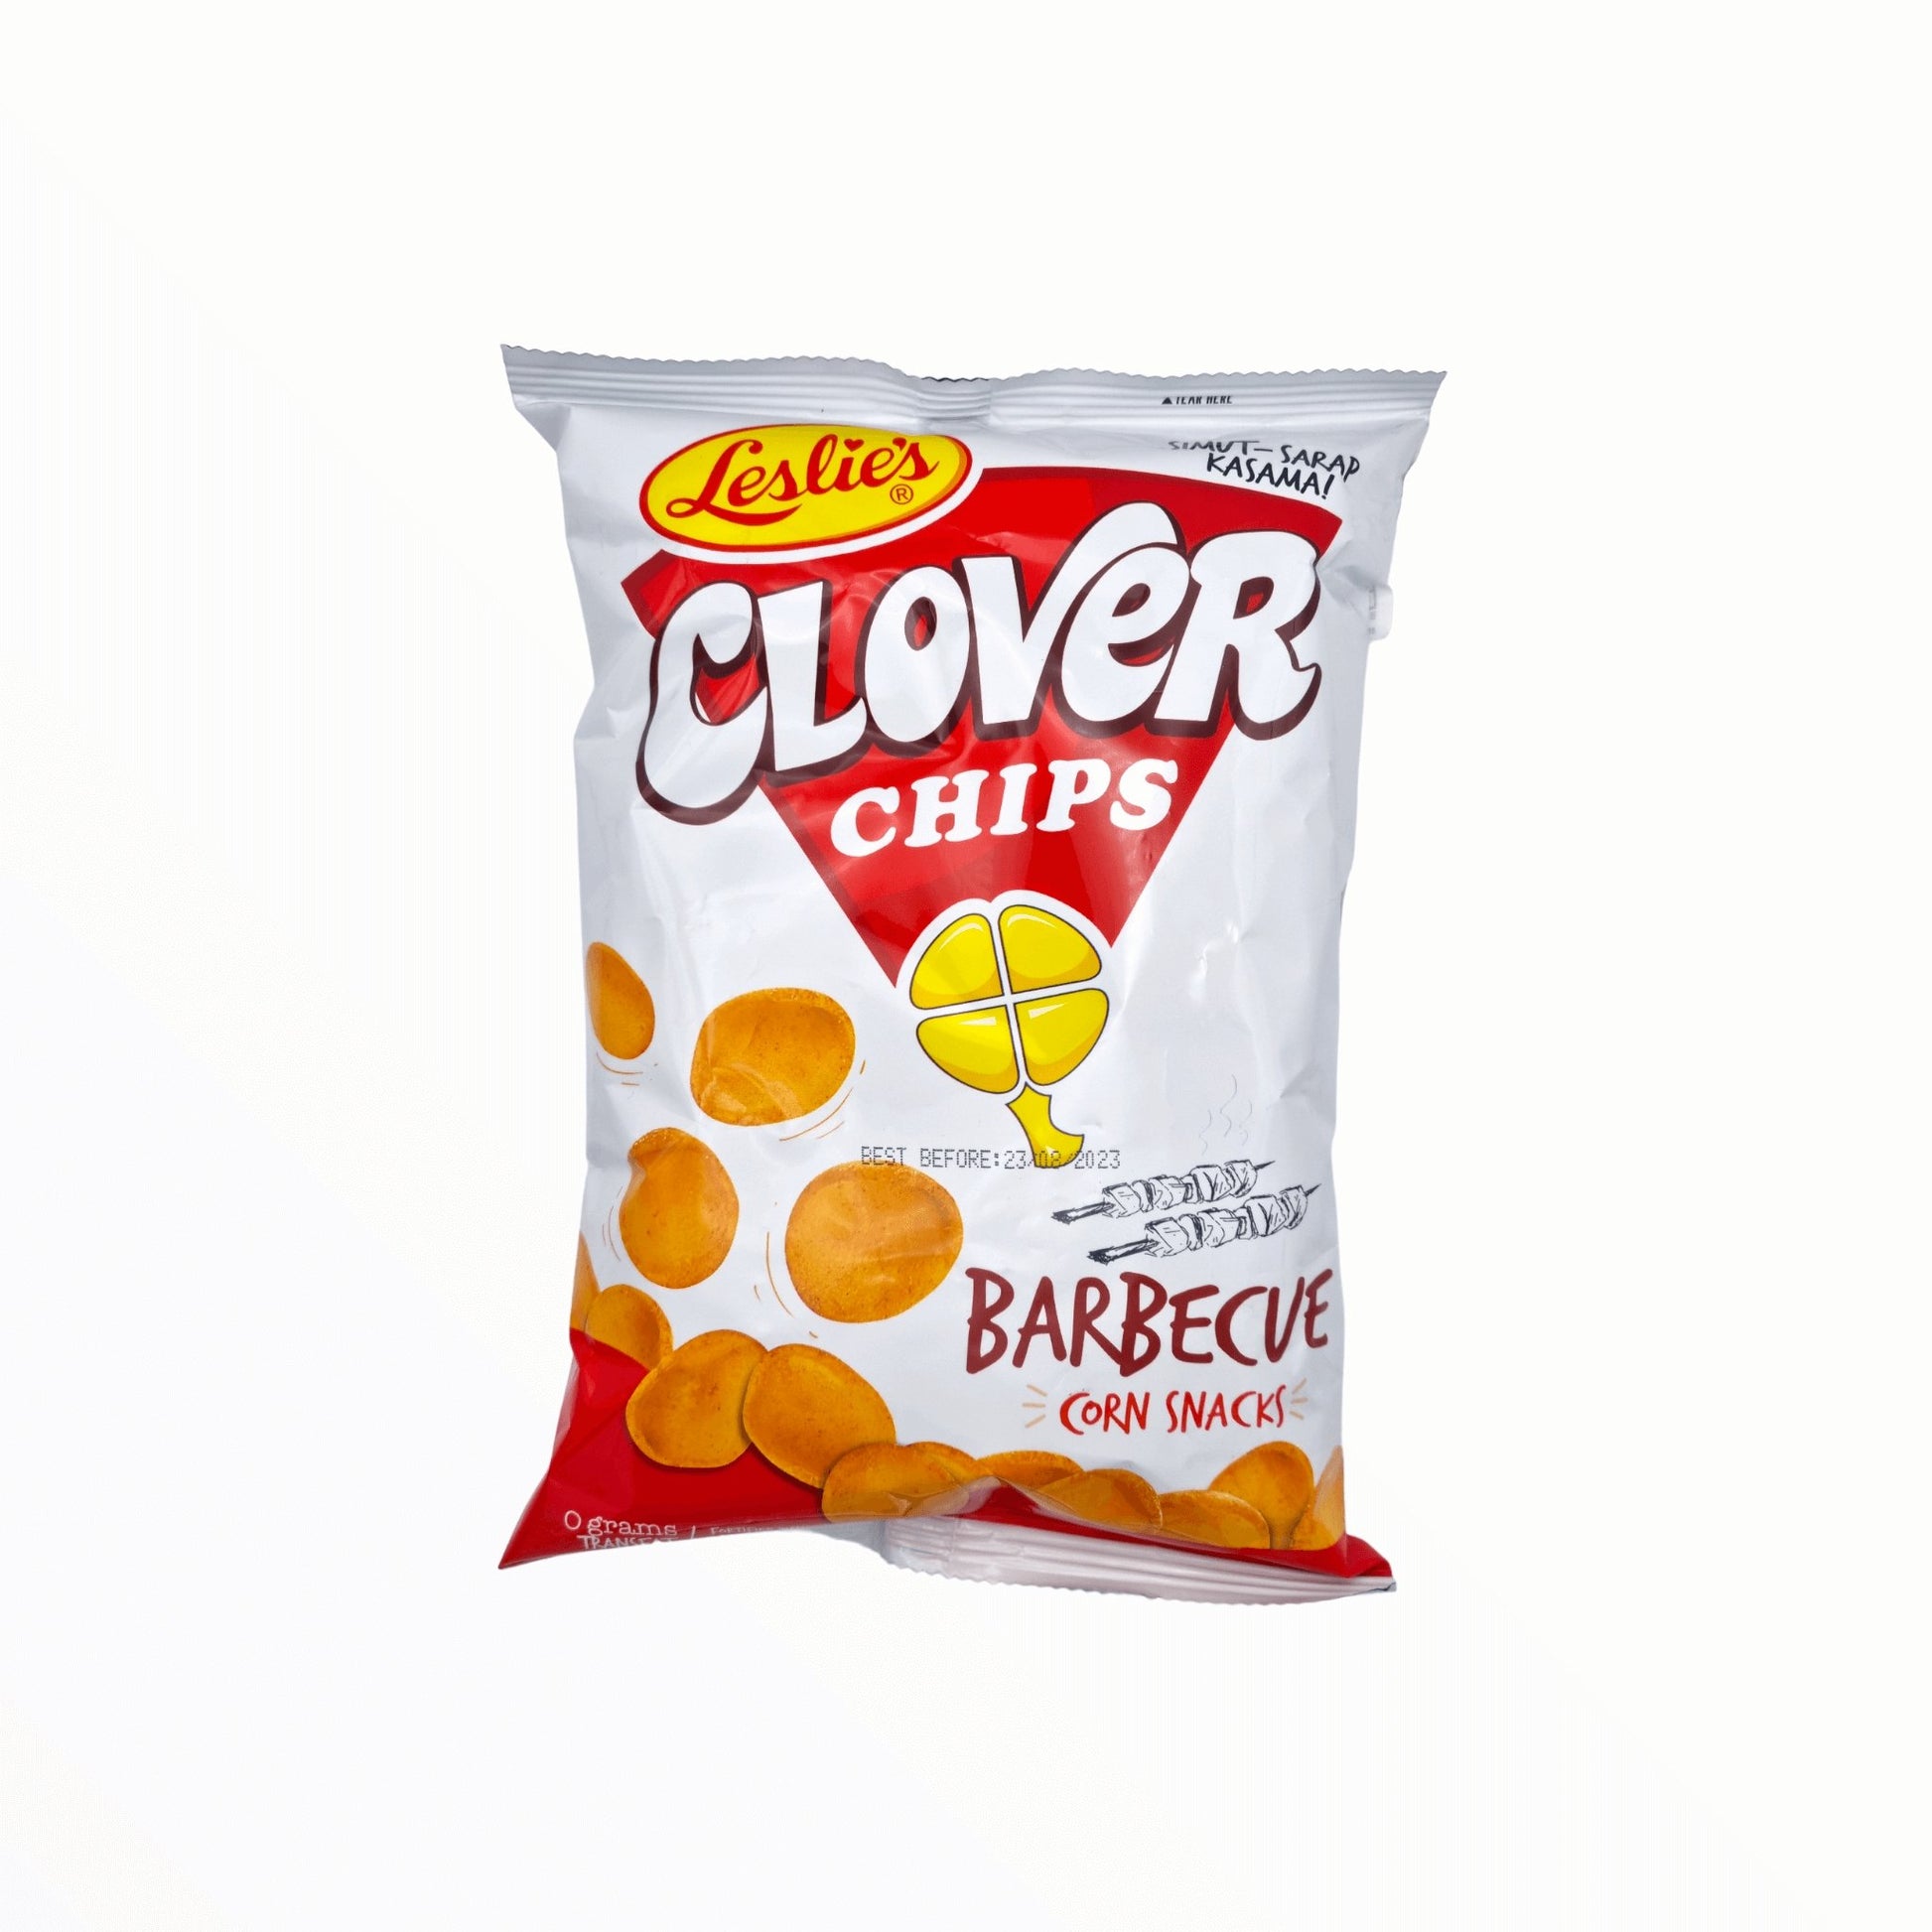 Clover Chips "Barbecue" 85g - Mabuhay Pinoy Asia Shop